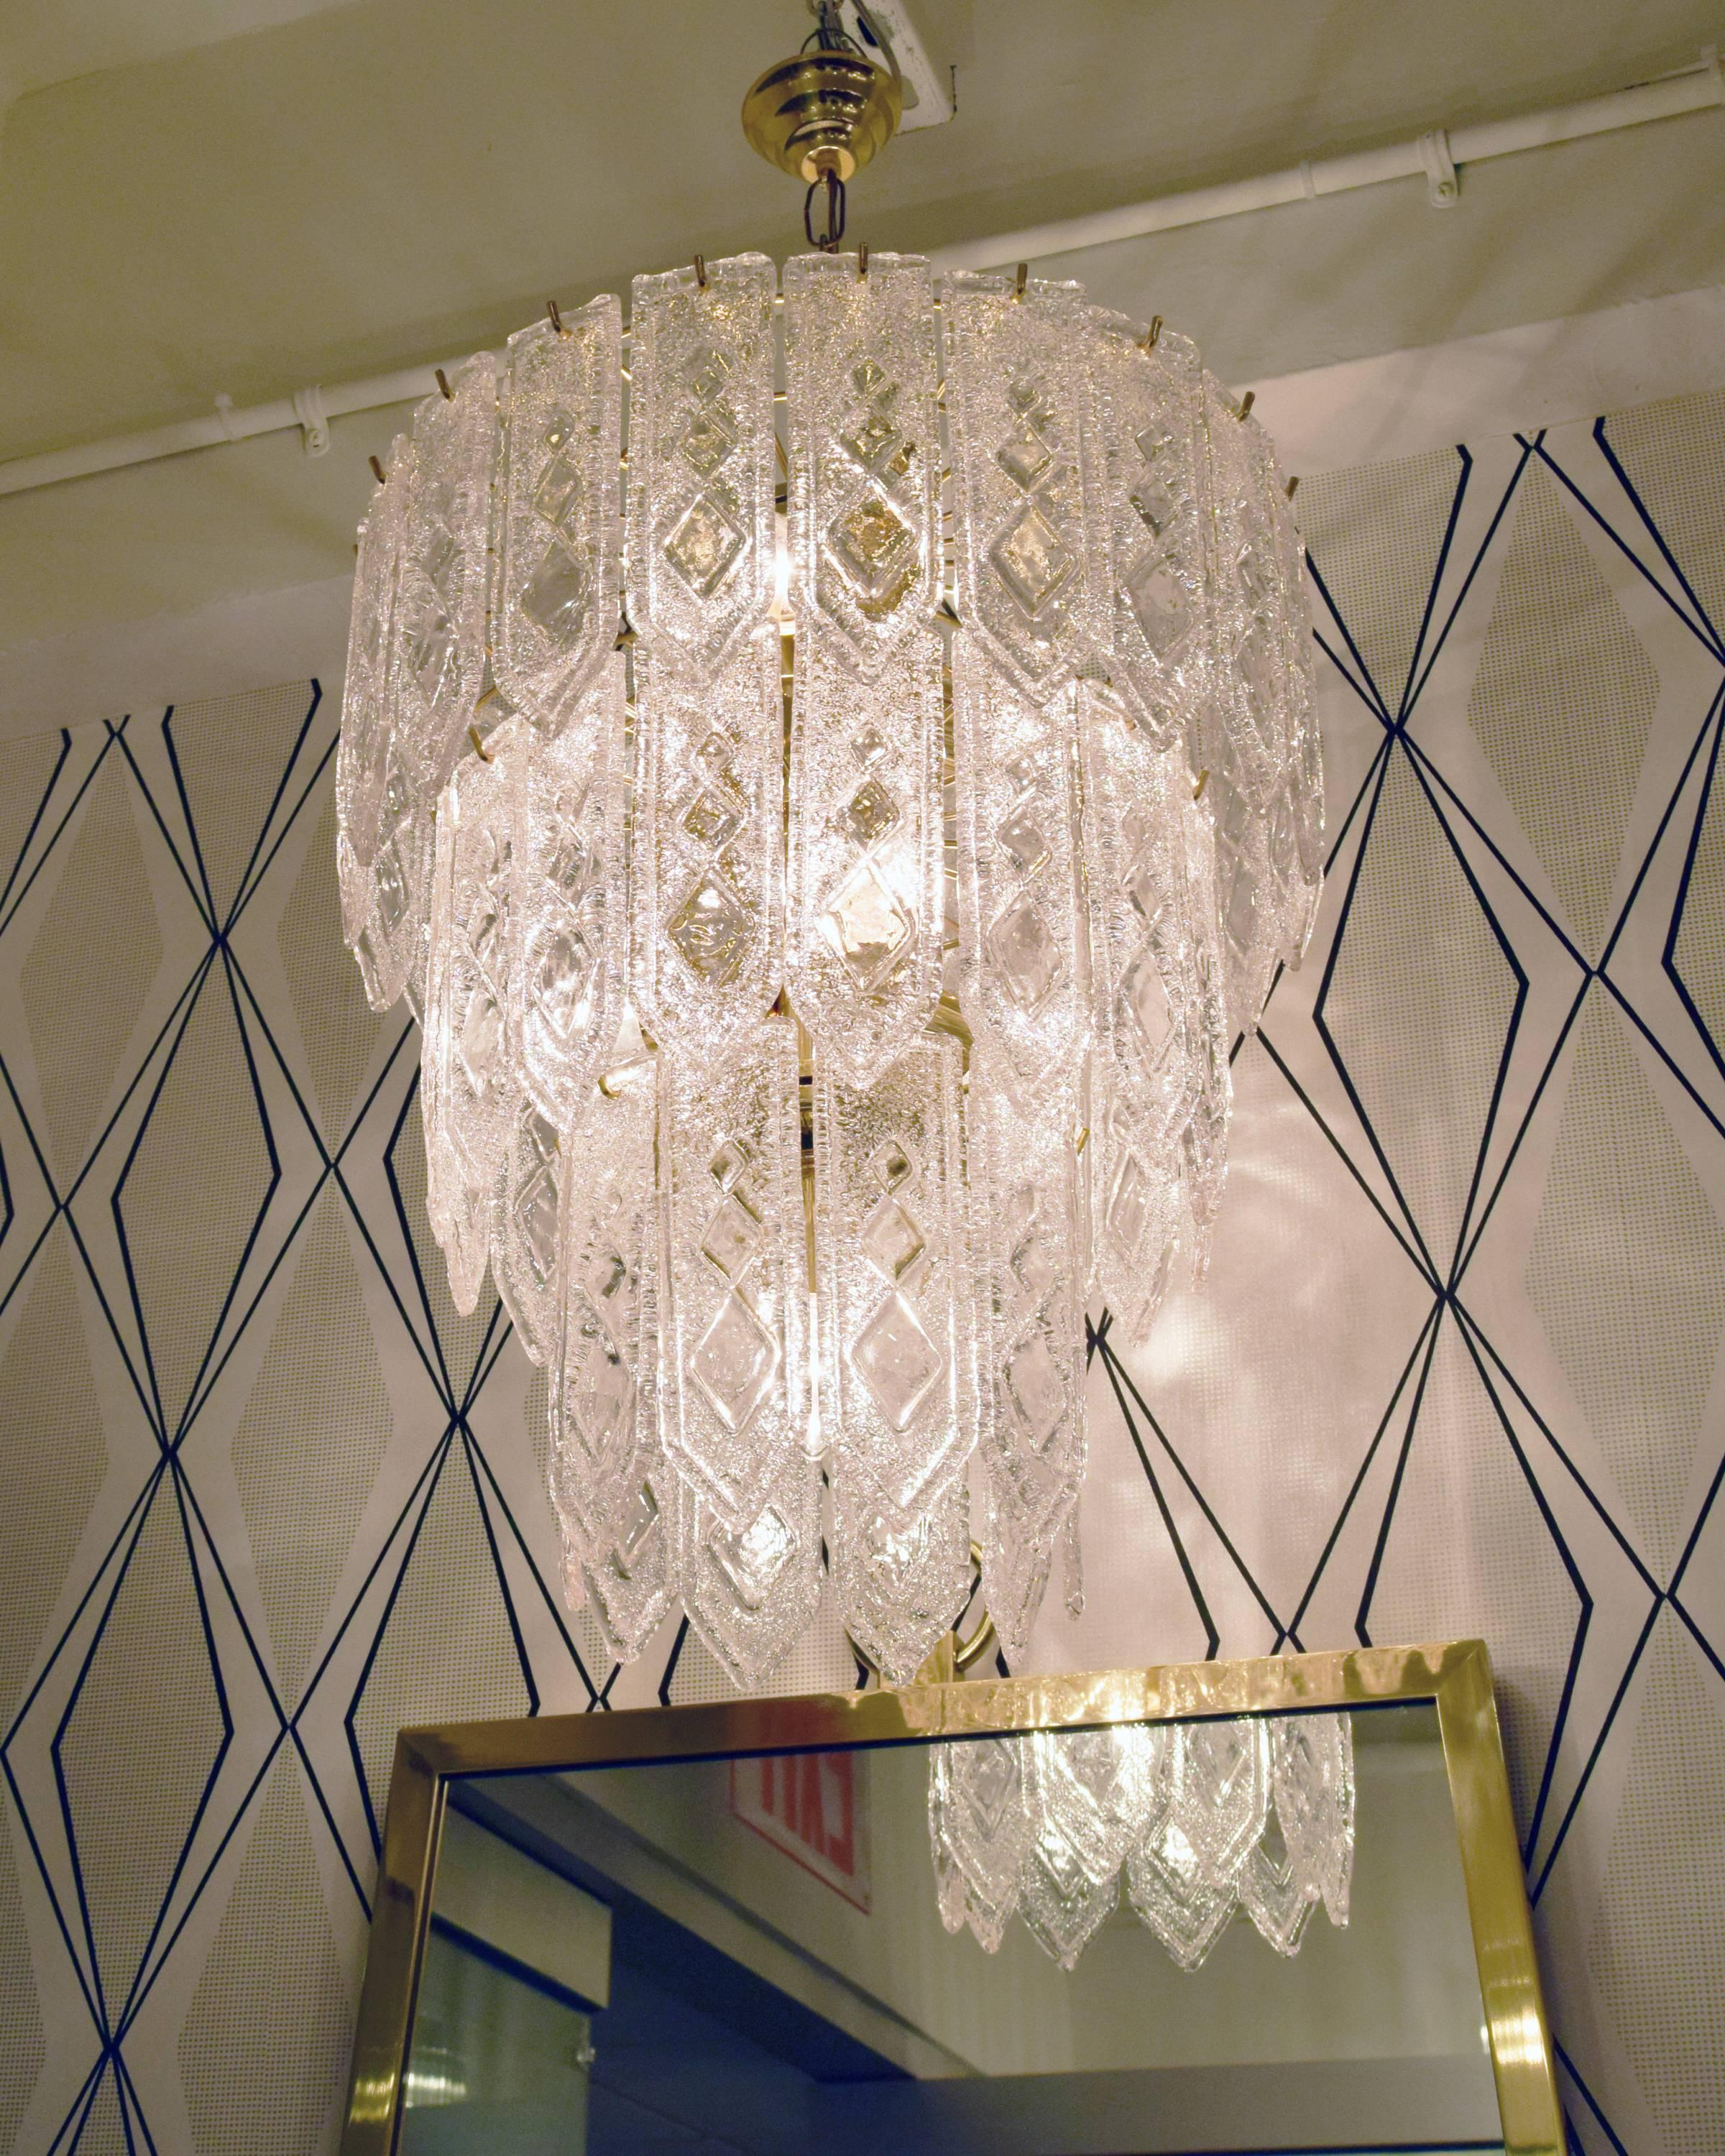 A pair of three-tiered wedding cake blown glass Italian chandelier in the style of Venini. The chandelier sconce has 46 crystals that have an Art Deco geometric pattern on them. All crystals in perfect condition. The chandelier can hold up to 360 W.